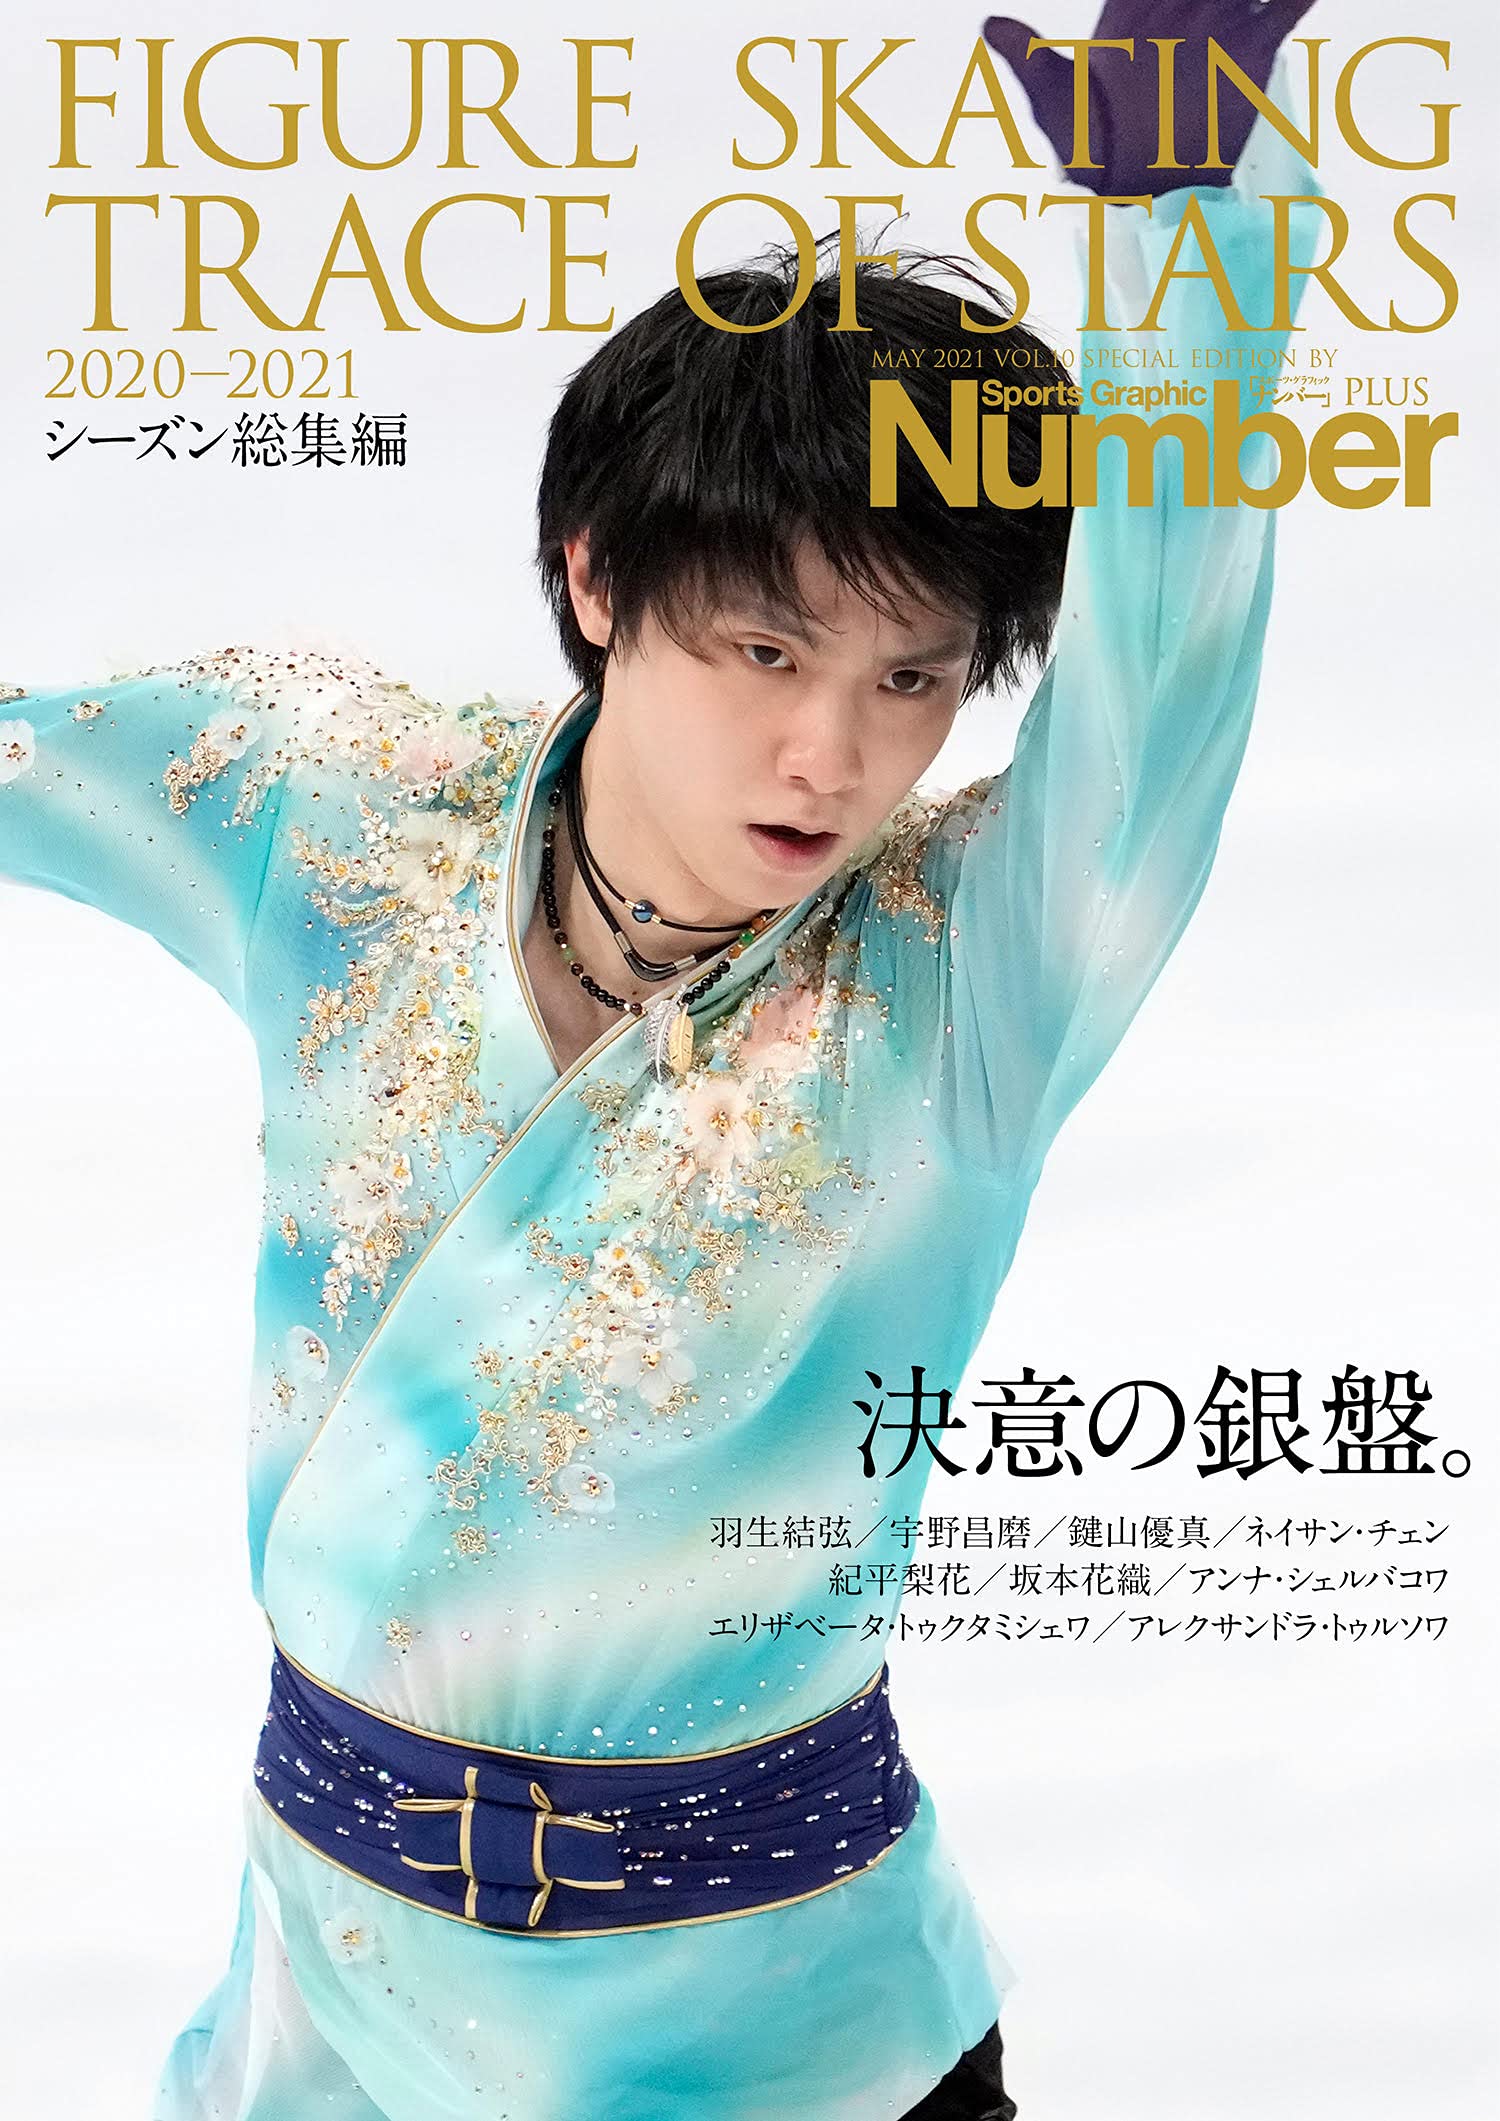 NumberPLUS「FIGURE SKATING TRACE OF STARS 2020-2021 フィギュアスケ-ト 決意の銀盤。」 (Sports Graphic Number PLUS(スポ-ツ·グラフィック ナンバ- プラス))